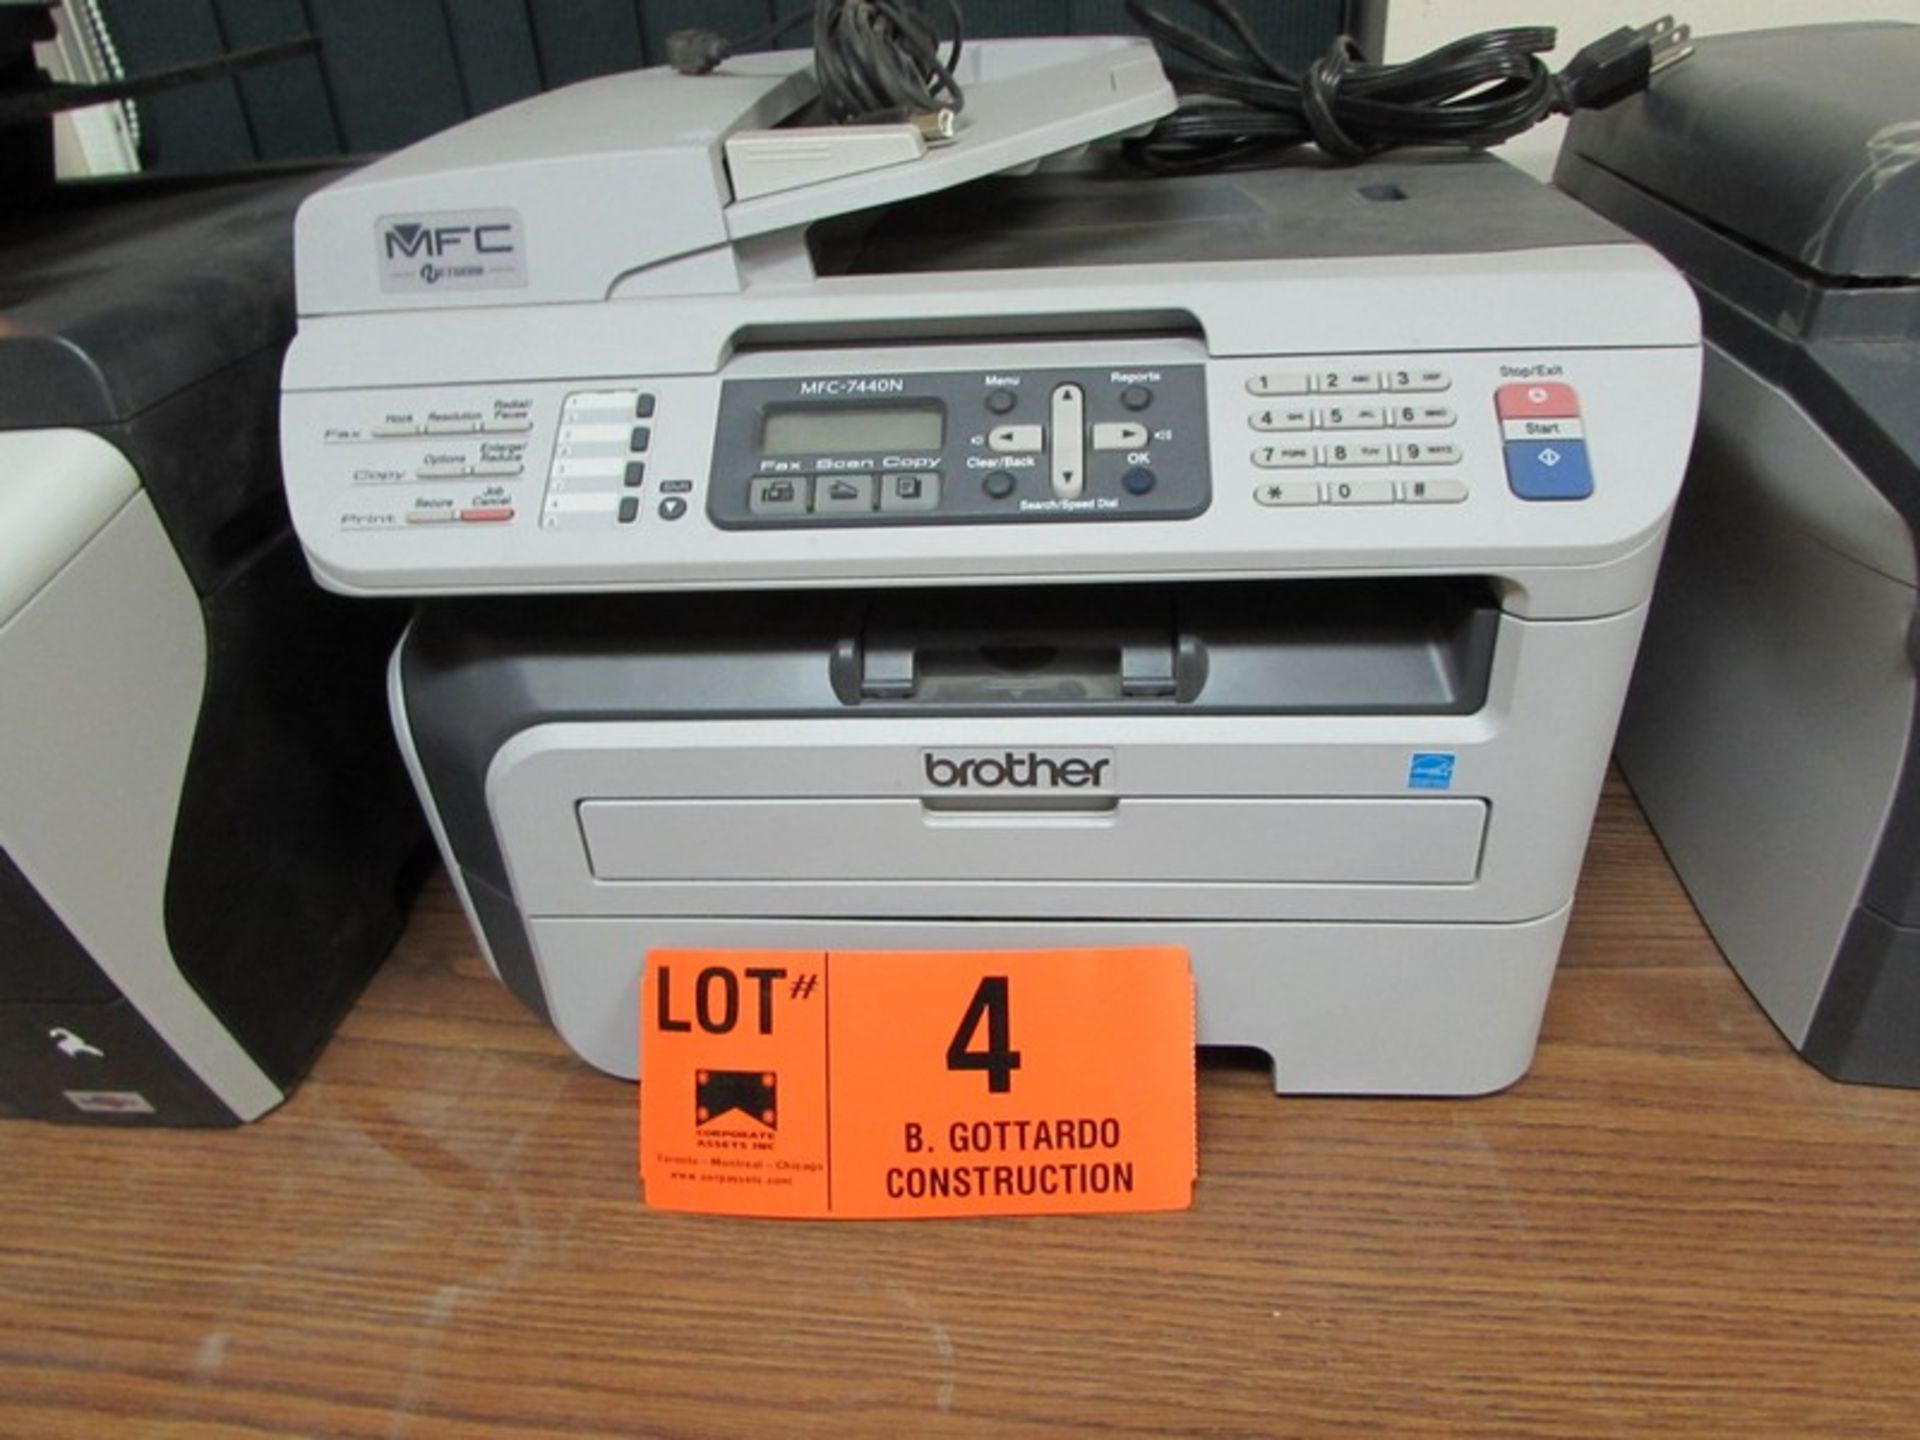 BROTHER MFC 7440N ALL-IN-ONE WITH FAX, SCAN, COPY, PRINT CAPABILITY